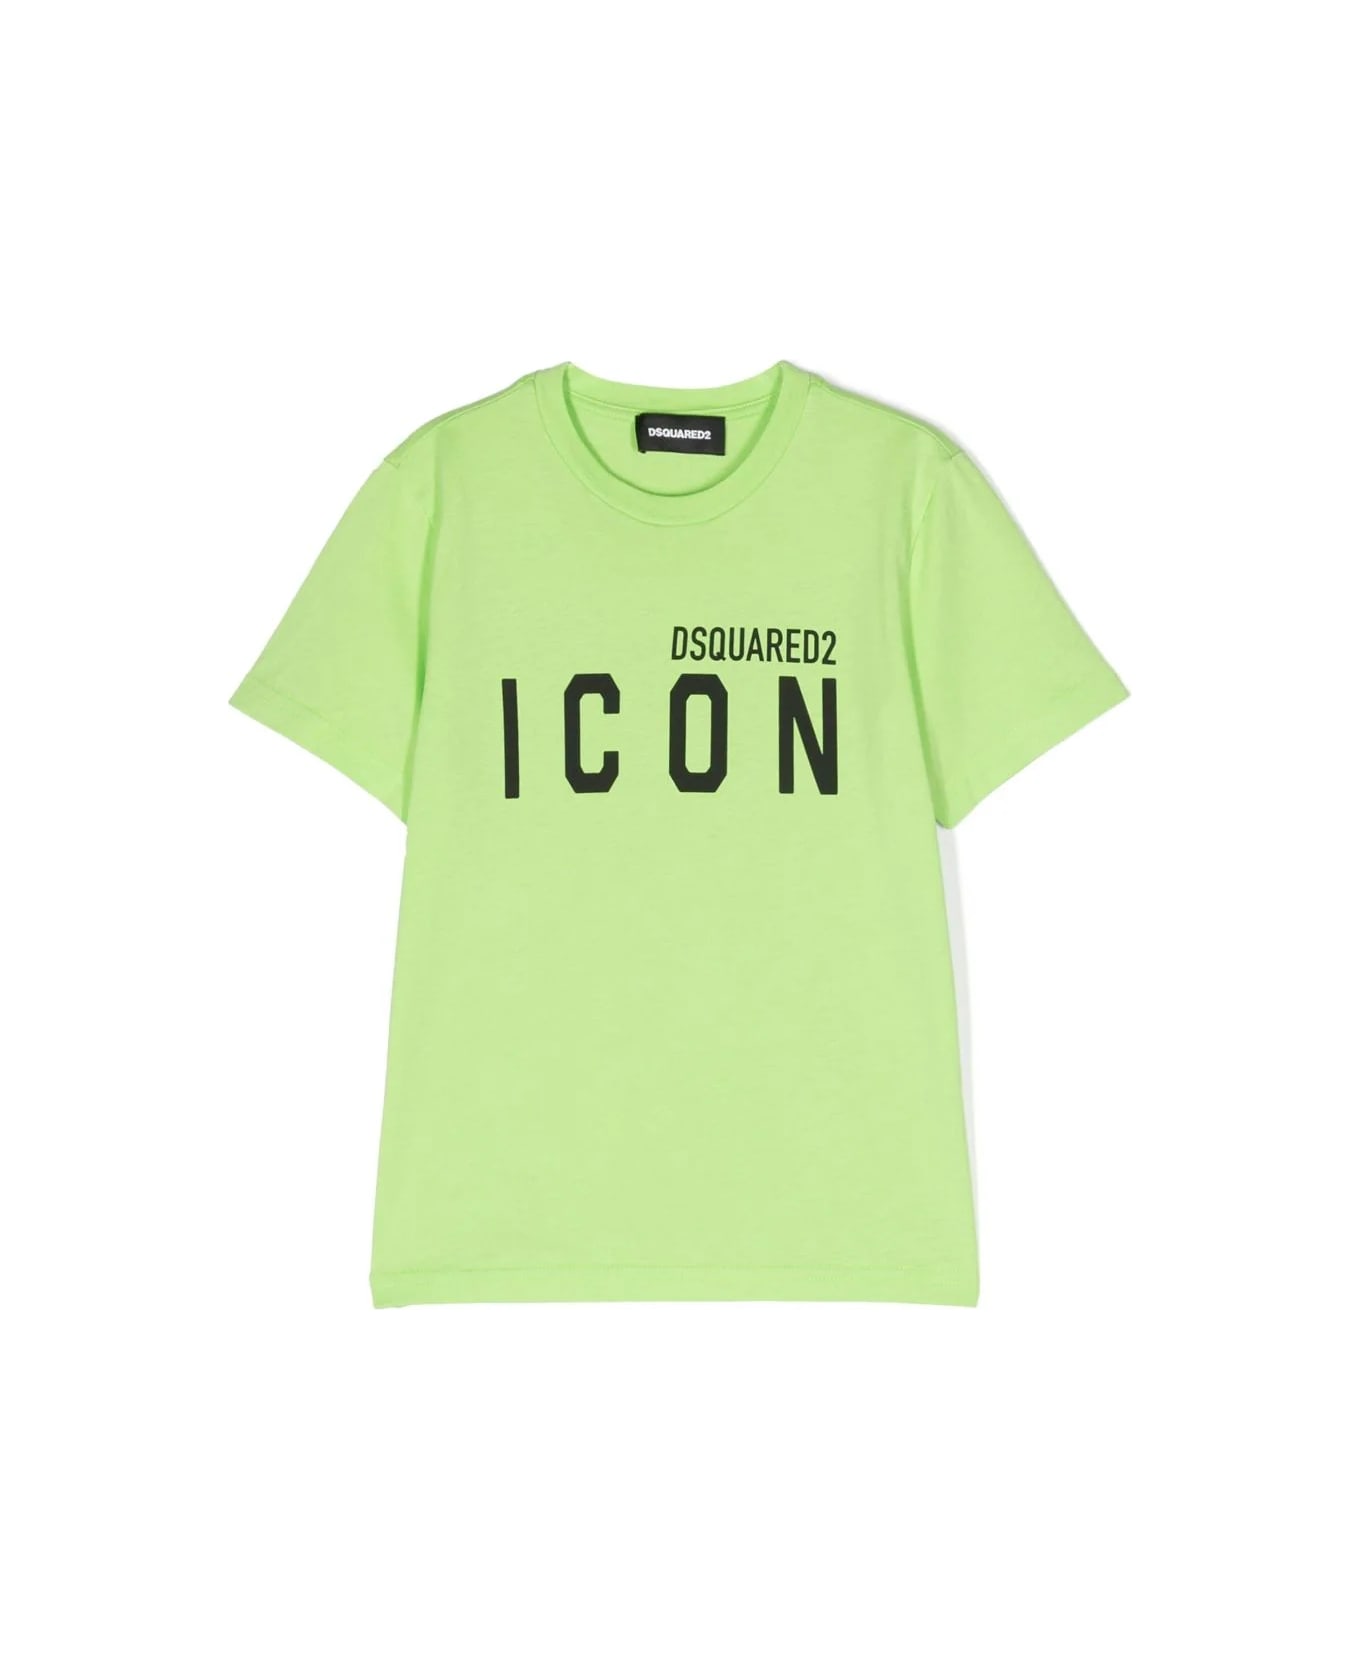 Dsquared2 Printed T-shirt - Green Tシャツ＆ポロシャツ